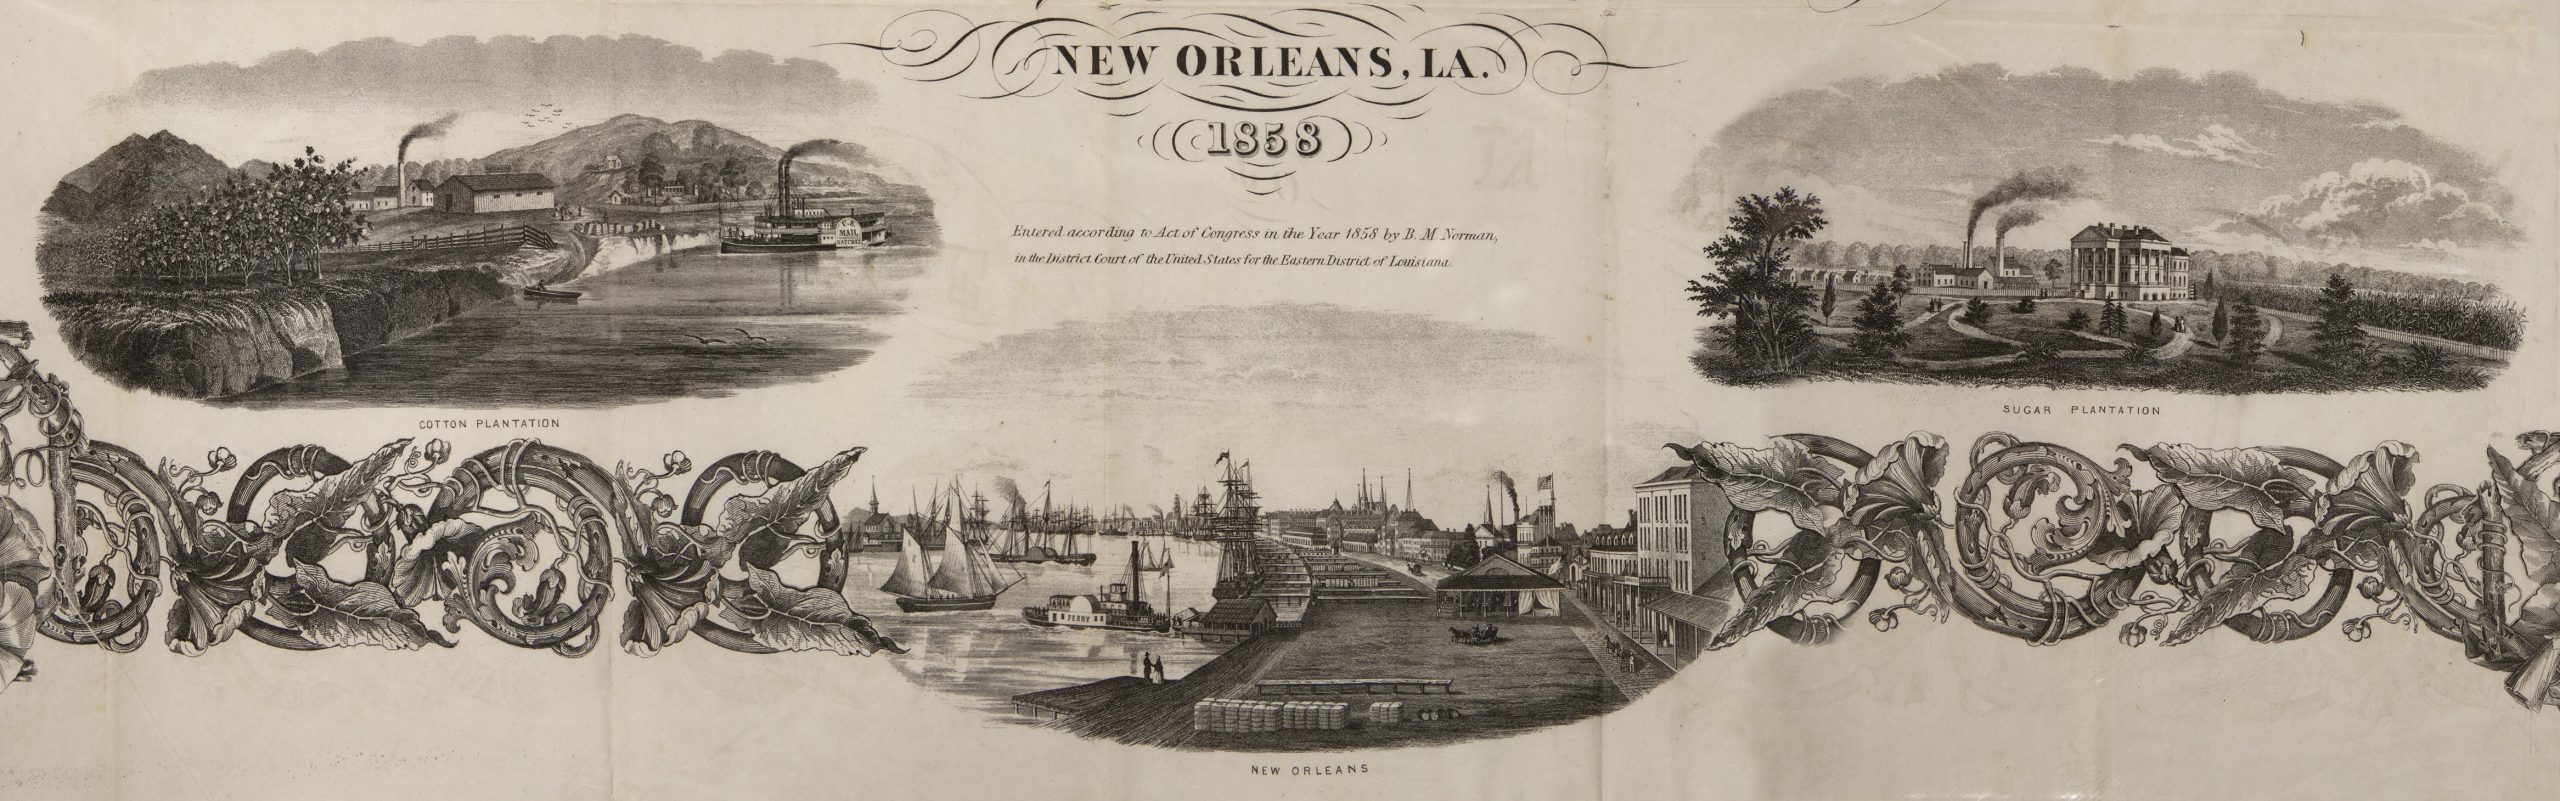 Three engraved images. The center images shows the port of New Orleans, with boats in the harbor and buildings lining the dock. The other two images show a cotton plantation (left) and a sugar planation (right). Both show grand houses with slave cabins in the distance.